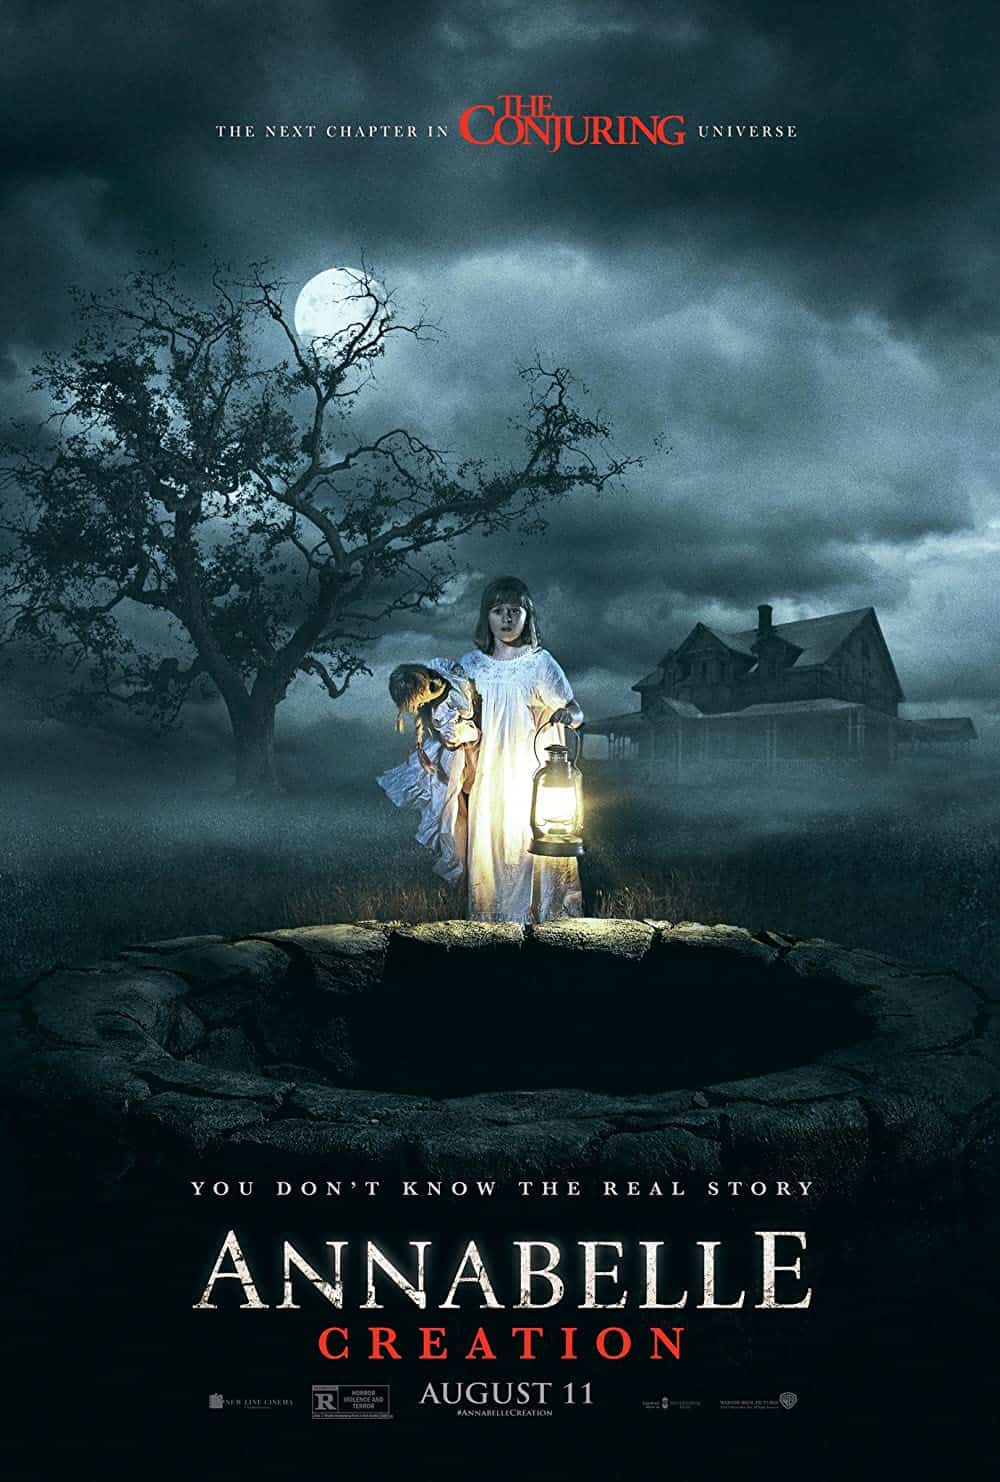 Annabelle Creation (2017) Best Exorcism Movies You Can't Miss